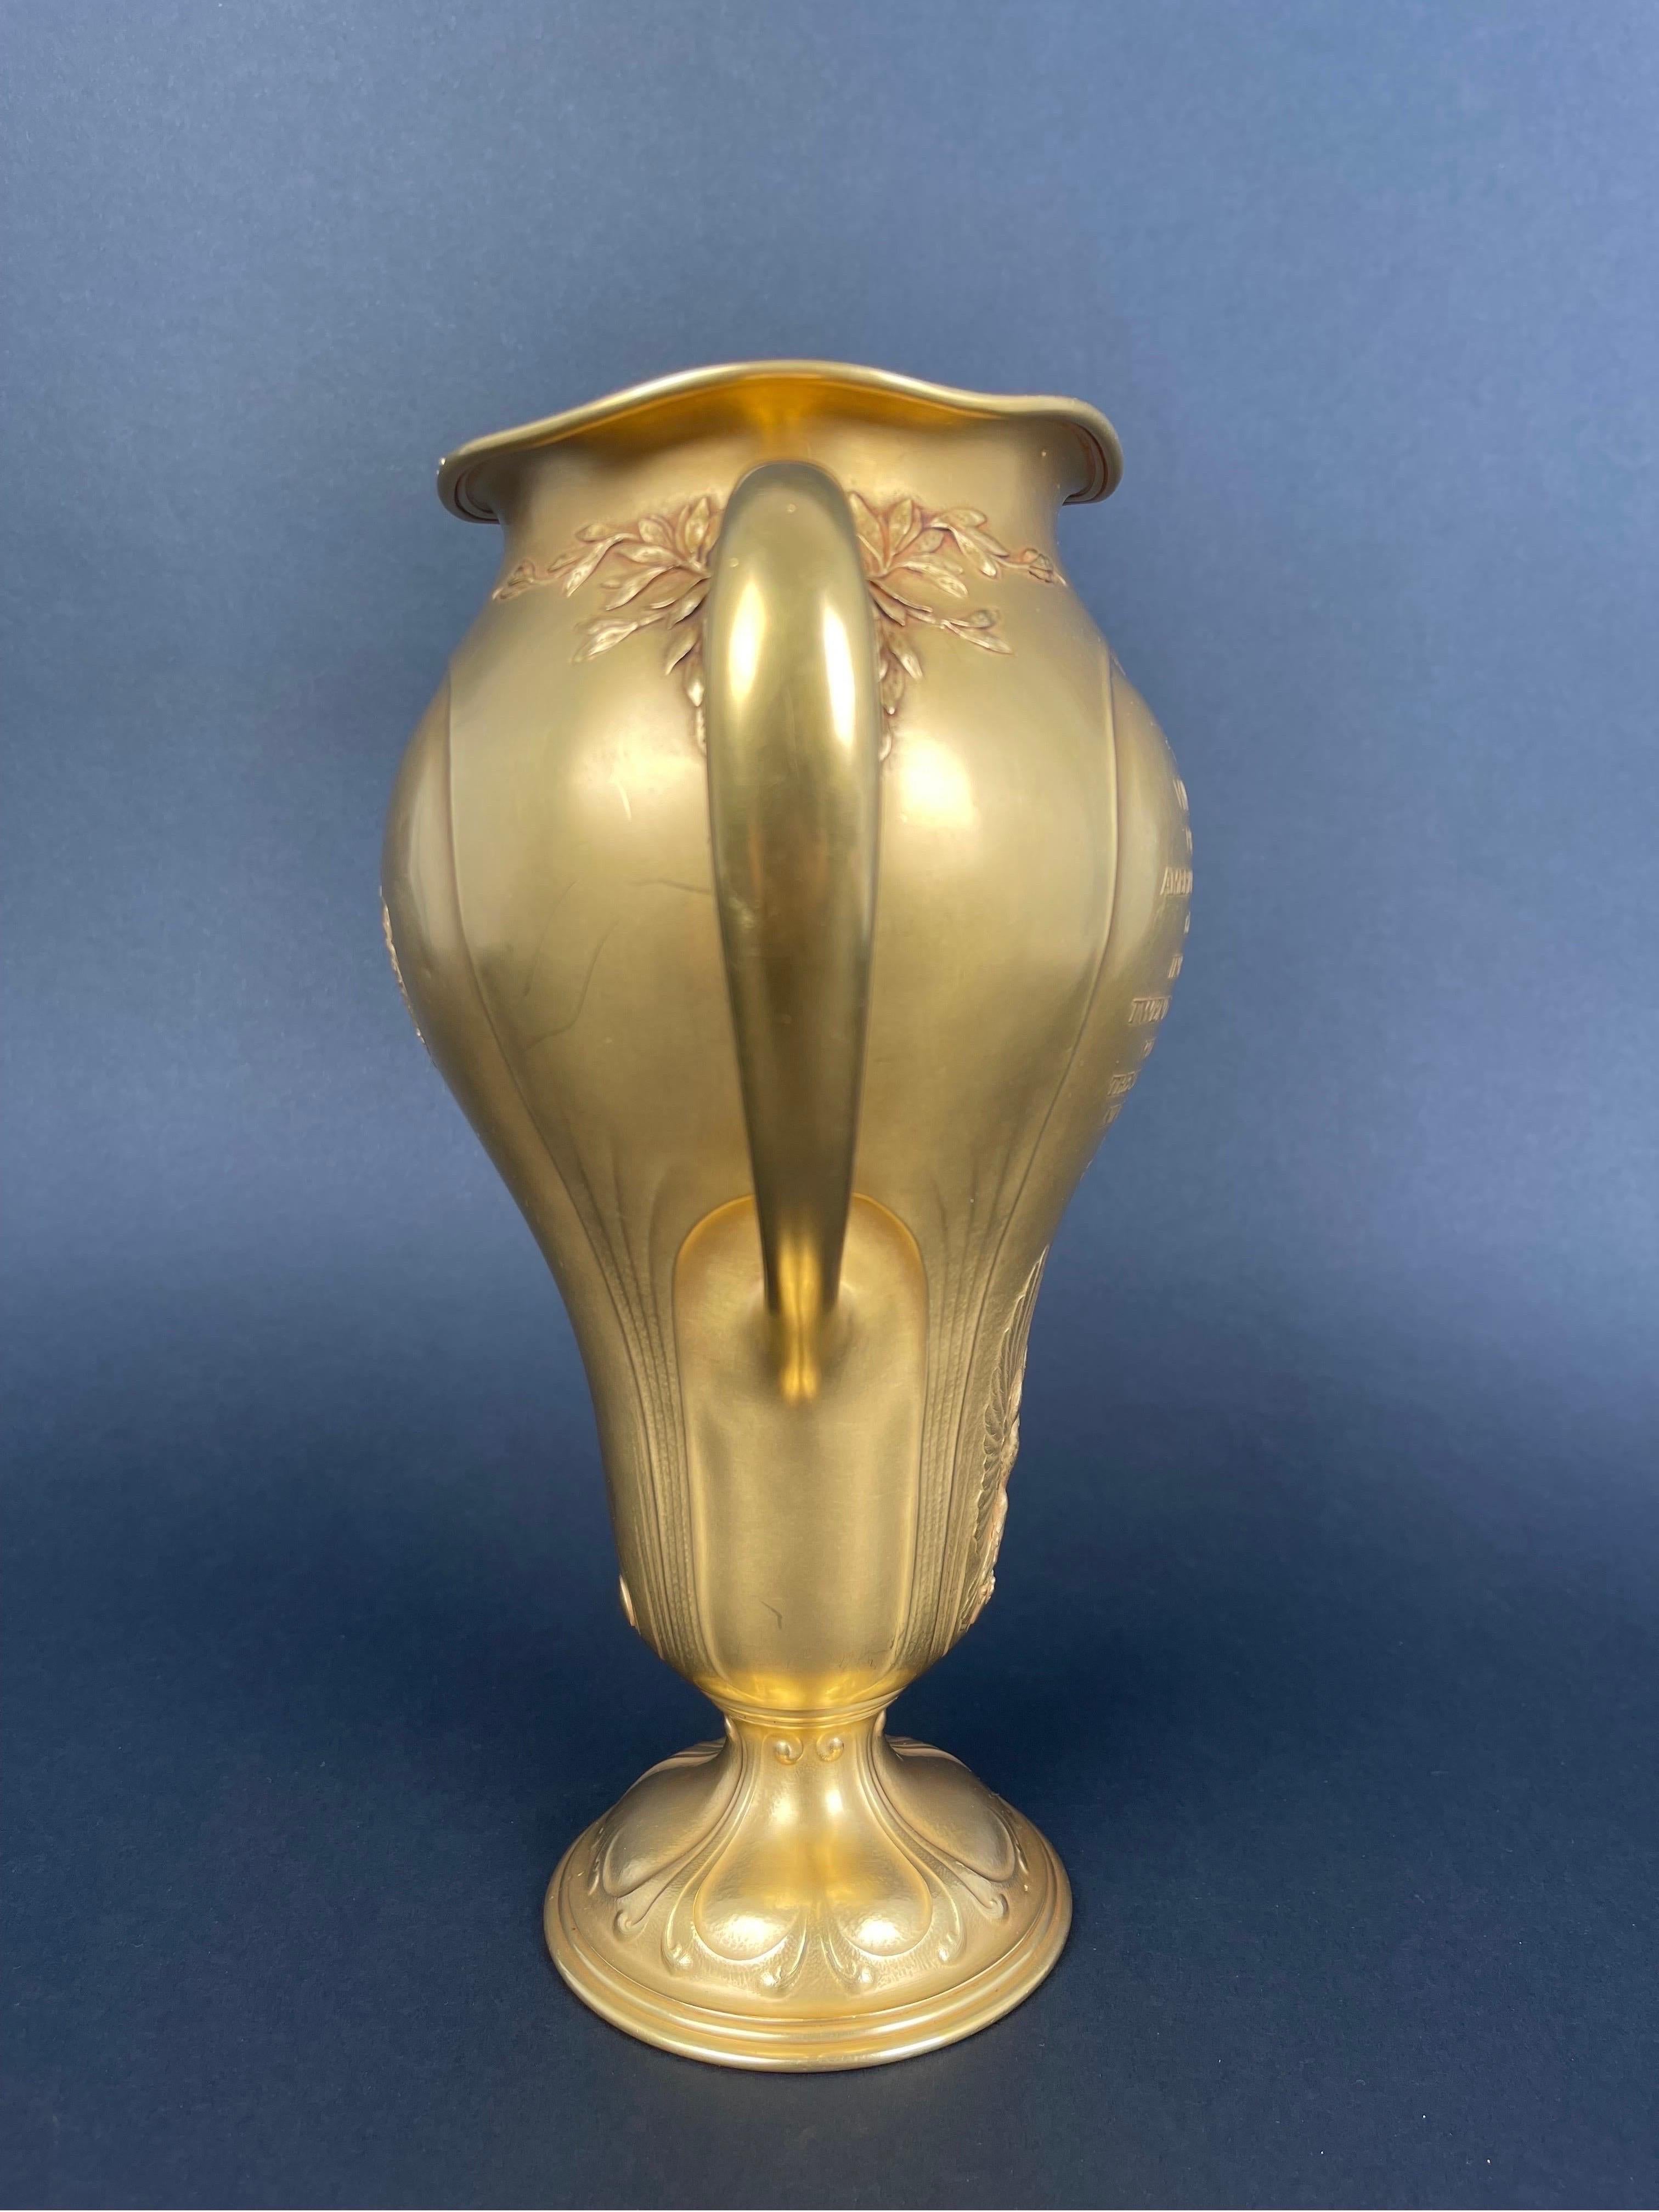 An Art Nouveau 18k Yellow Gold Trophy By Tiffany & Co. For Sale 2